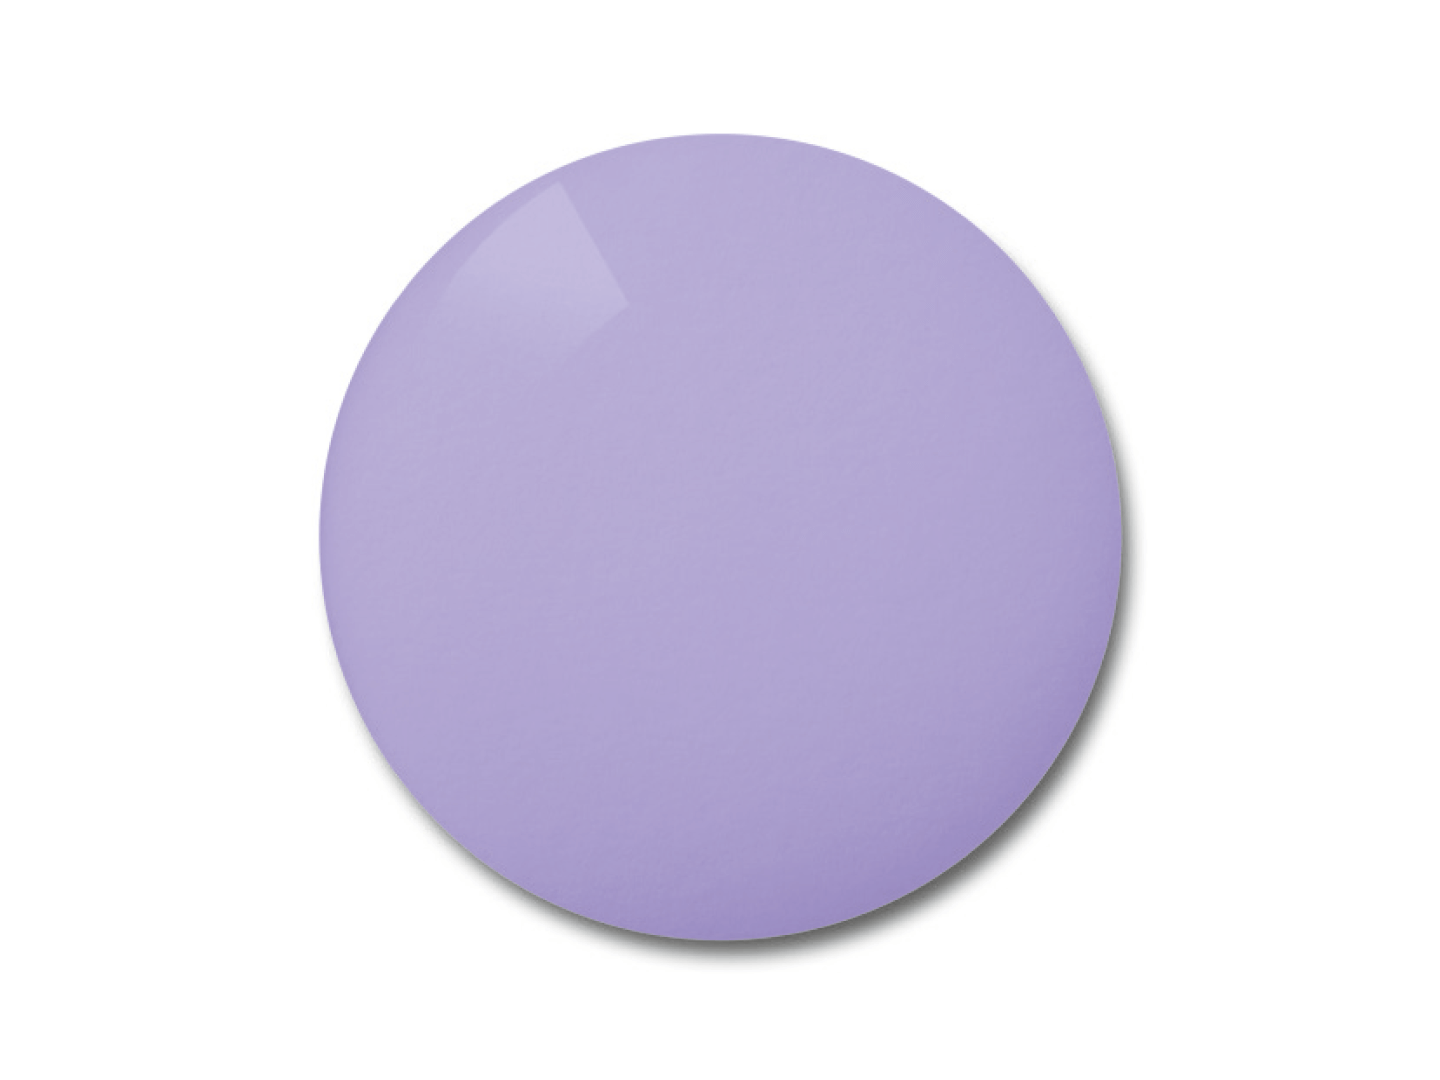 Colour example of the Sweet Violet lens tint which is suitable for cycling. 